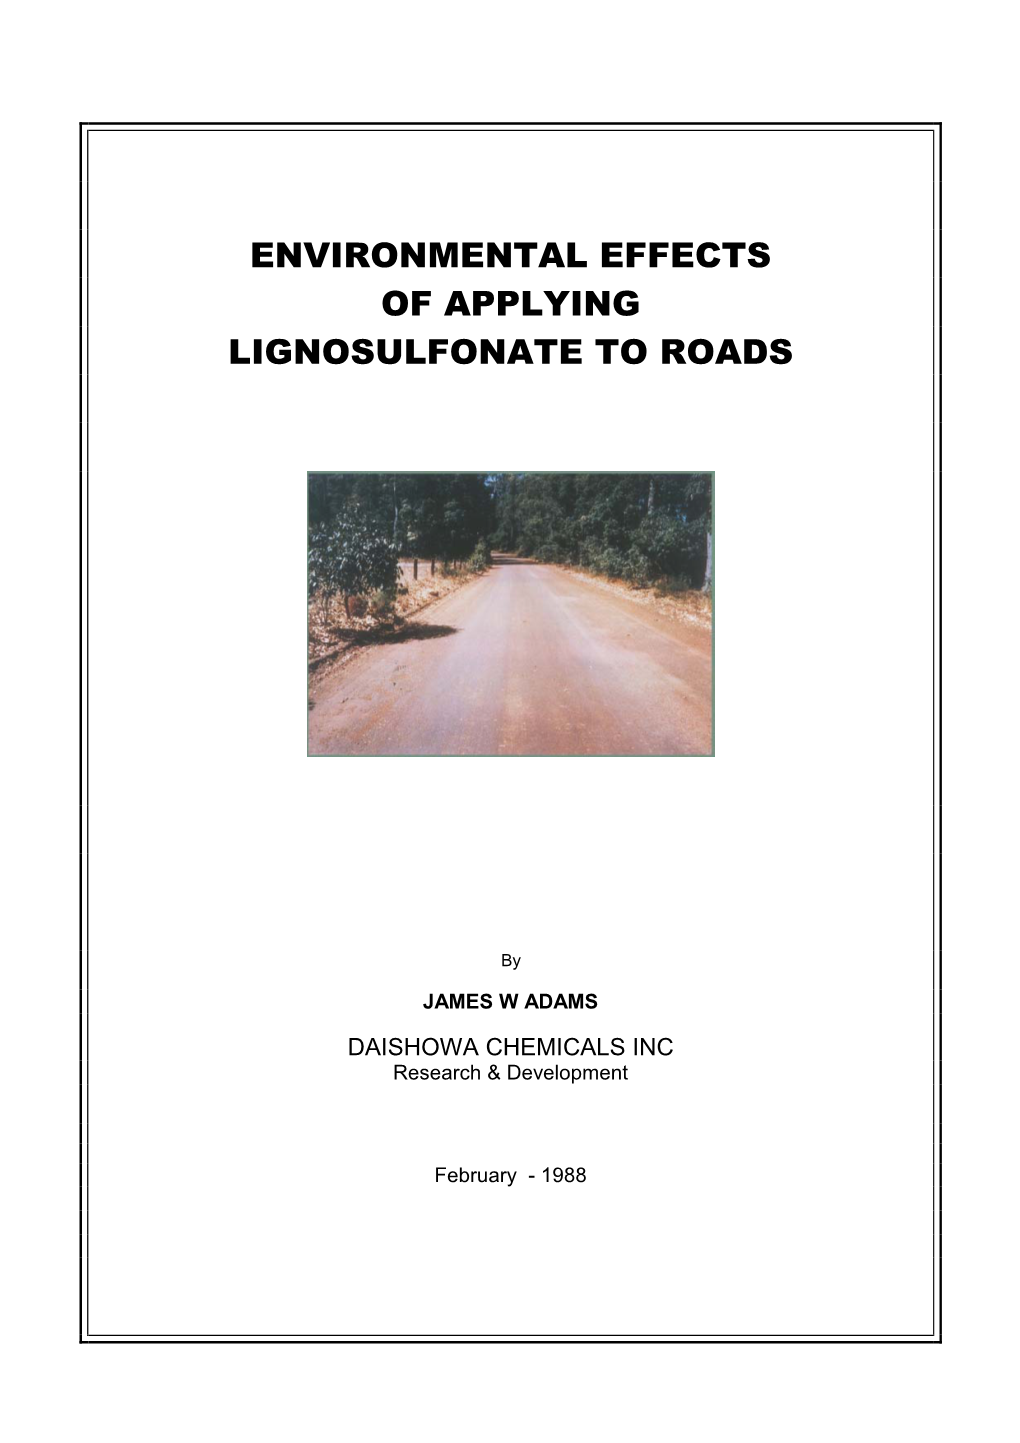 Environmental Effects of Applying Lignosulfonate to Roads